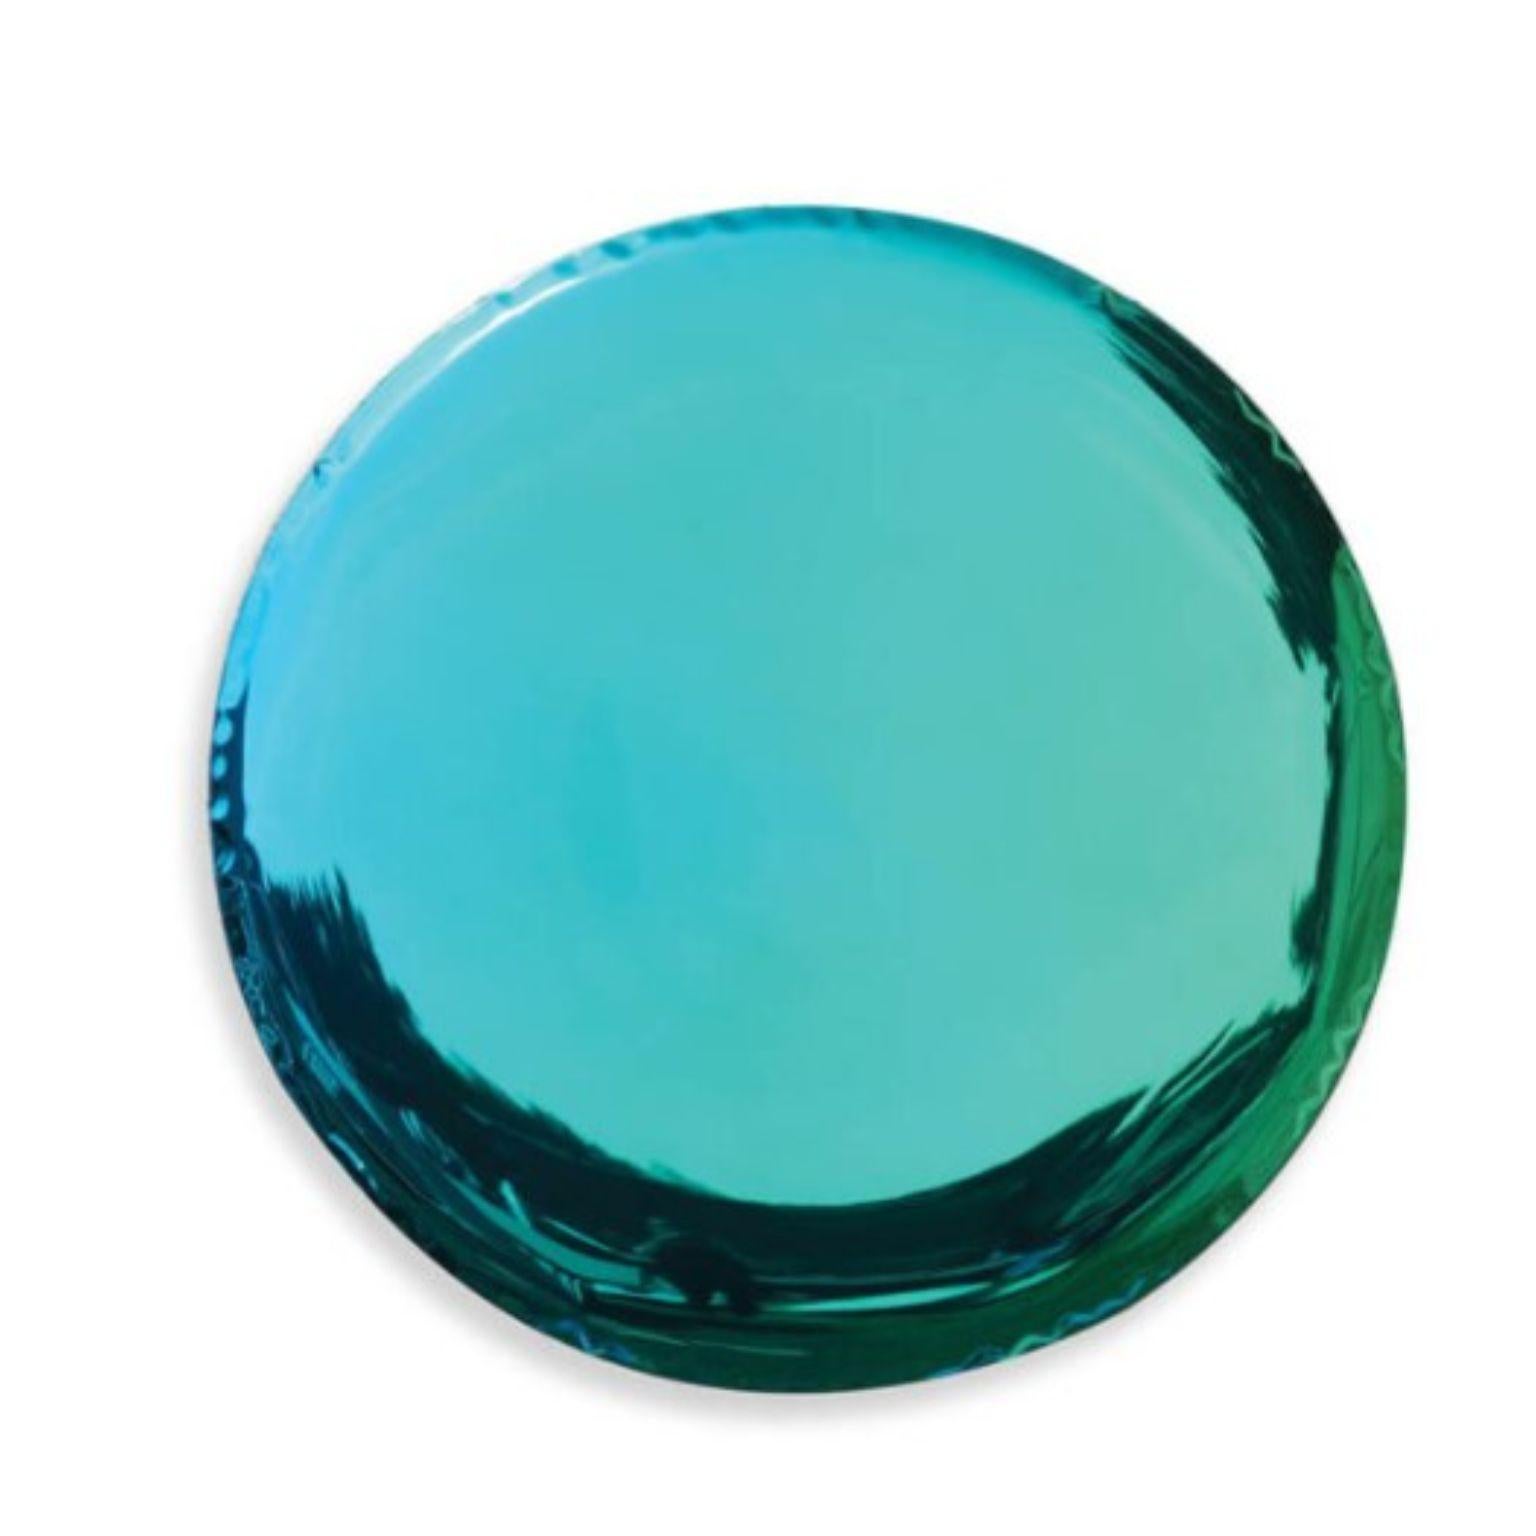 Emerald Sapphire Oko 62 sculptural wall mirror by Zieta
Dimensions: Diameter 62 x D 6 cm 
Material: Stainless steel. 
Finish: Sapphire/Emerald.
Available in finishes: Stainless Steel, Deep Space Blue, Emerald, Sapphire, Sapphire/Emerald, Dark